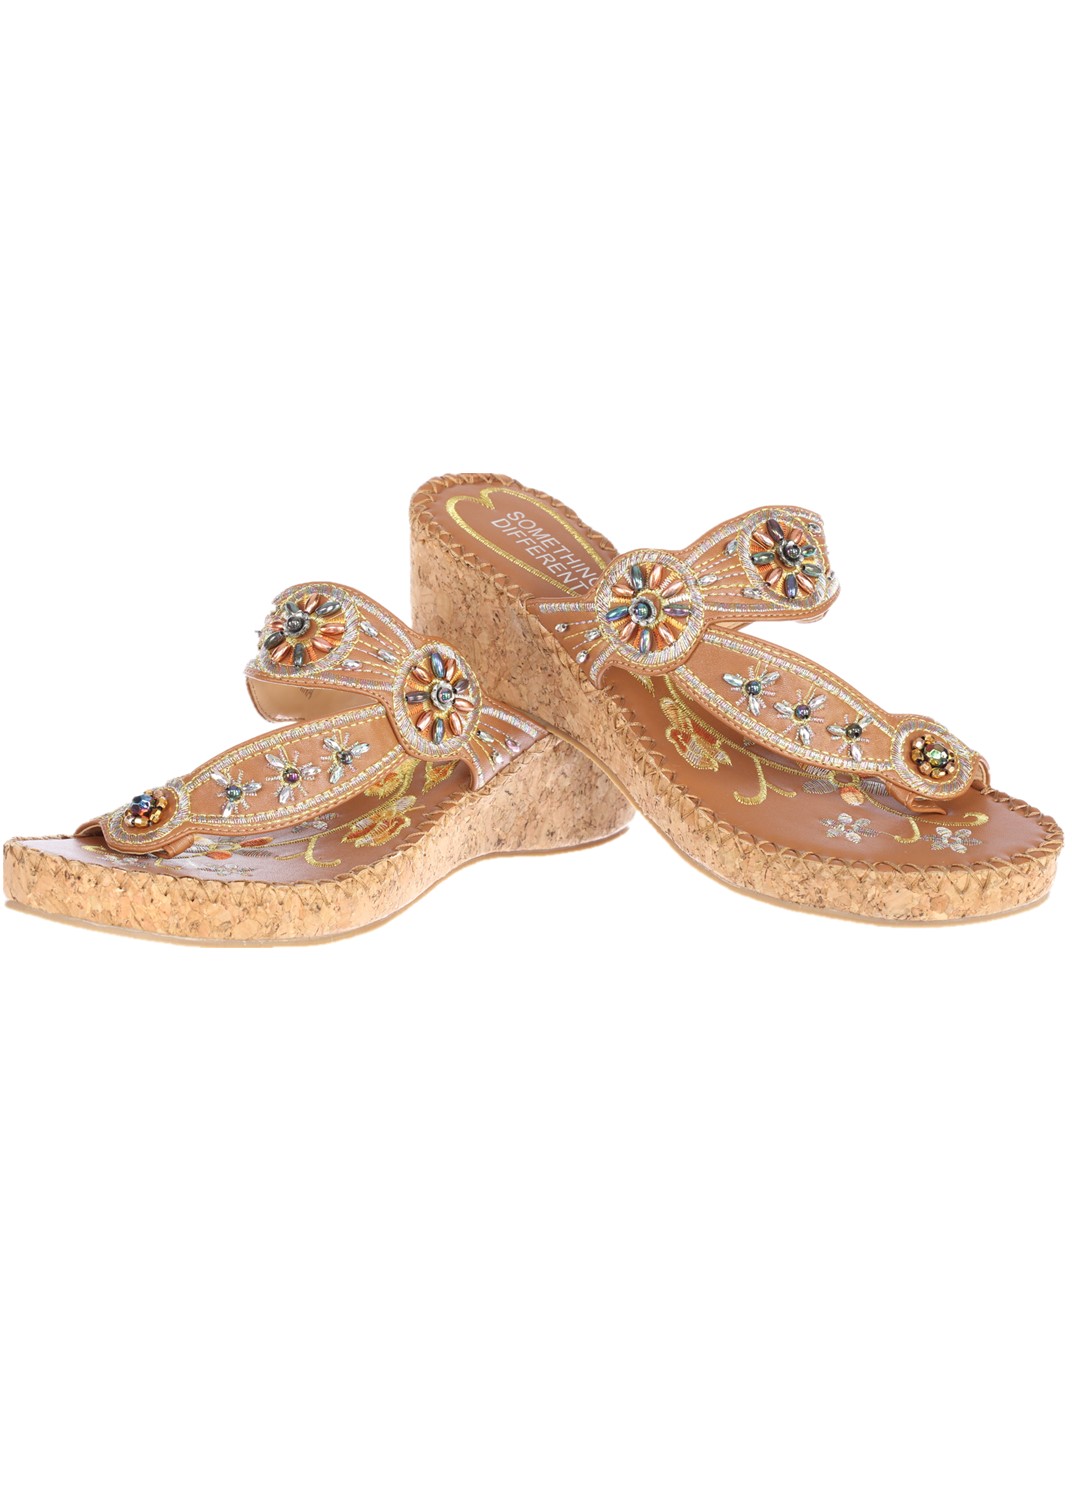 Women's Casual Embroided Beaded Wedge Sandals-Brown-6 - image 3 of 3